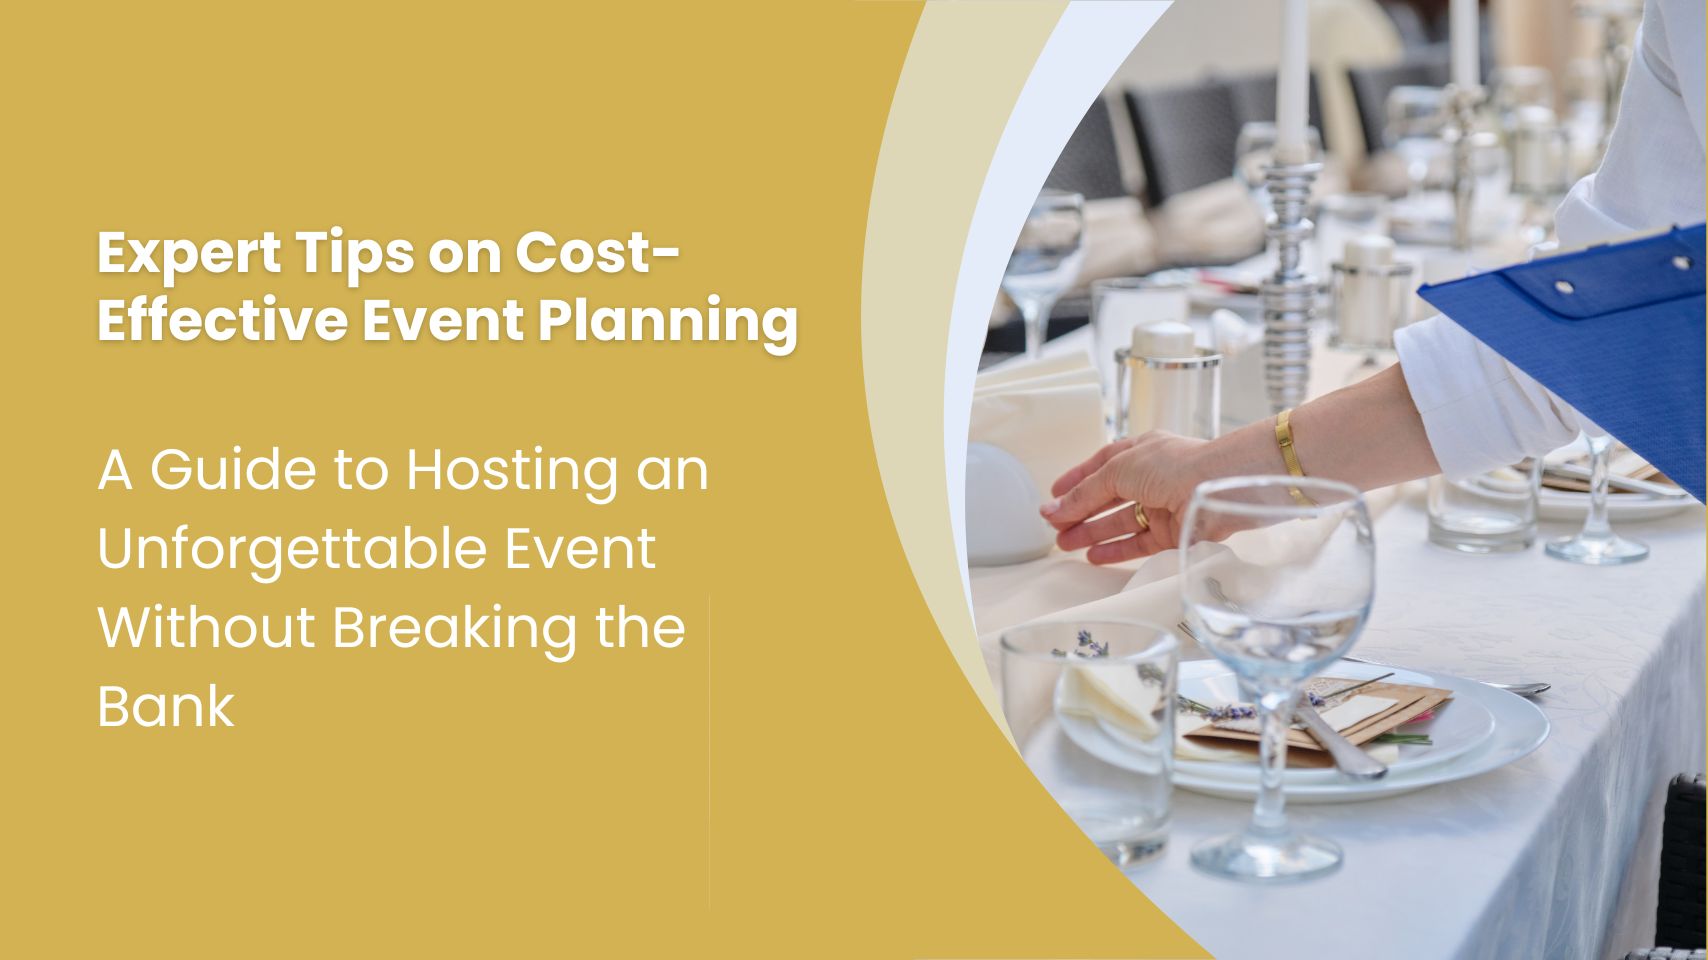 Expert Tips on Cost-Effective Event Planning: A Guide to Hosting an Unforgettable Event Without Breaking the Bank